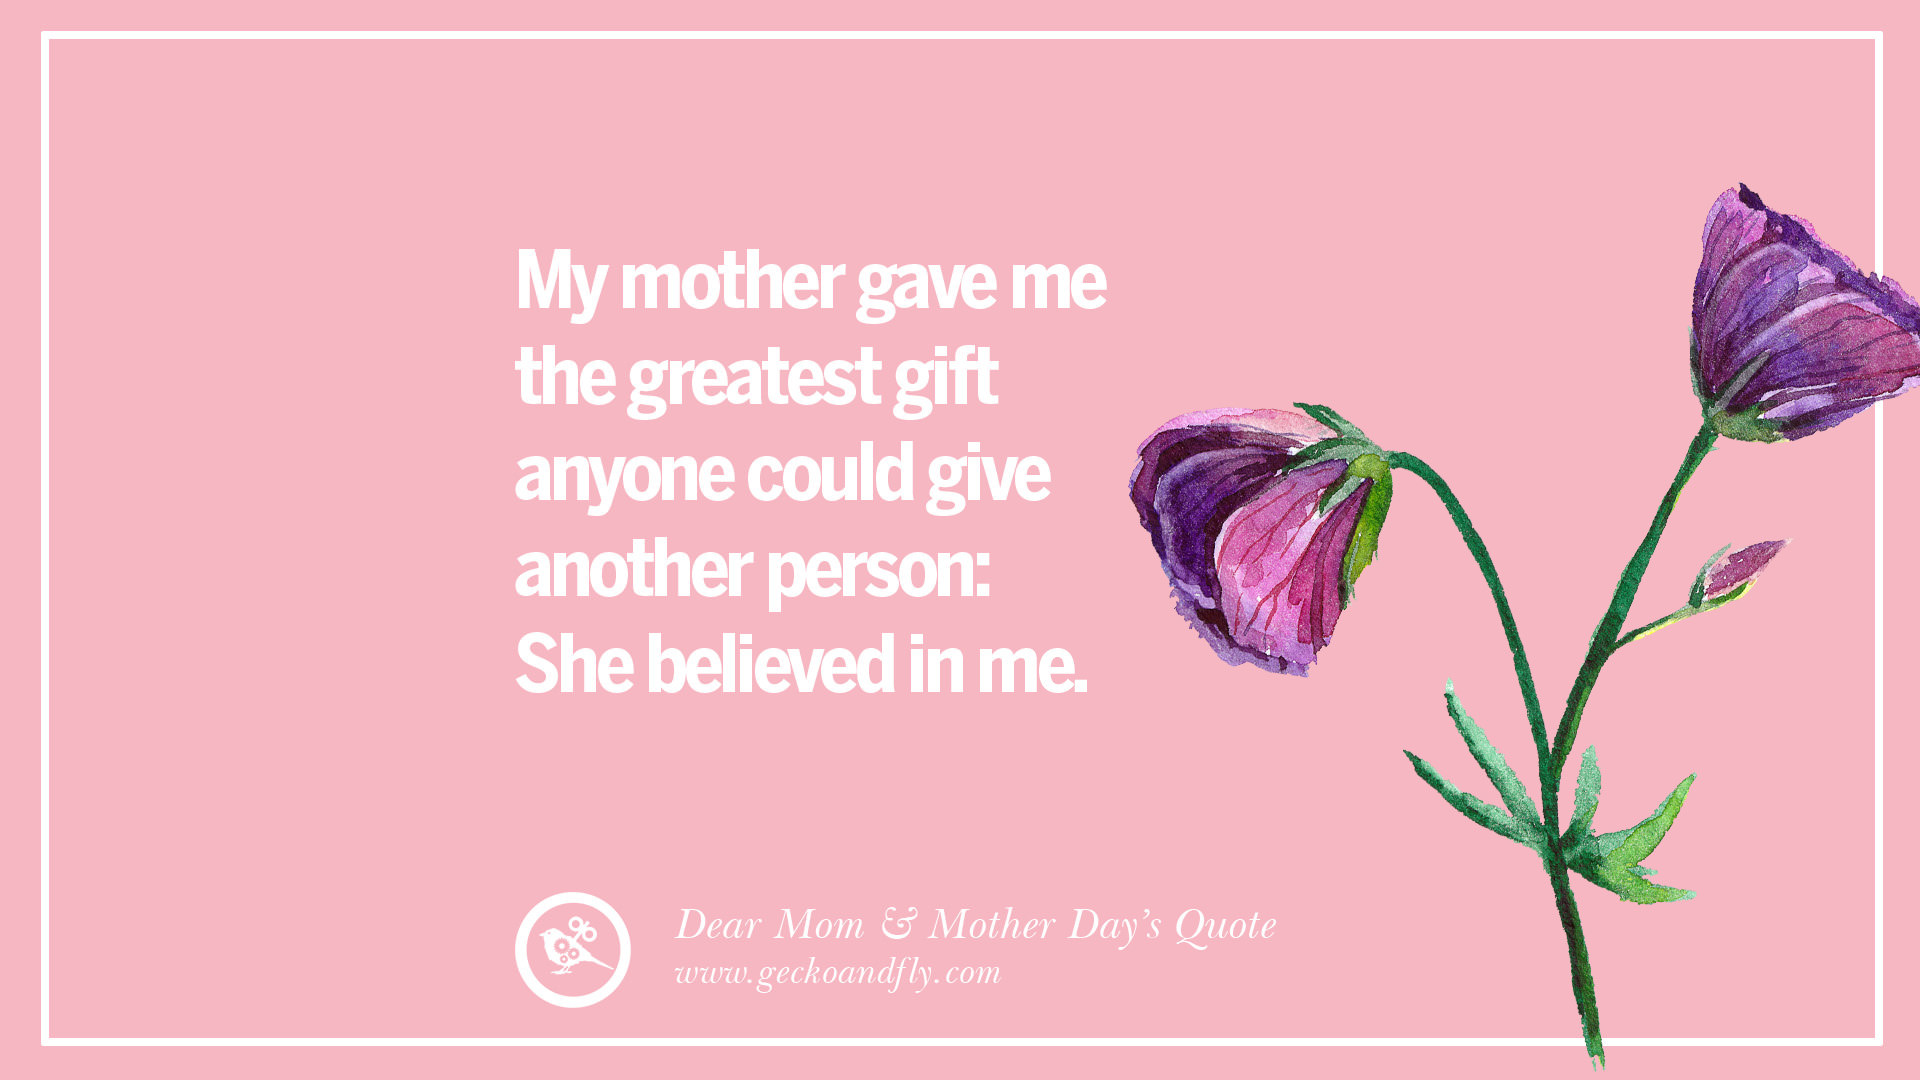 Growing Up Without A Mother Quotes
 60 Inspirational Dear Mom And Happy Mother s Day Quotes